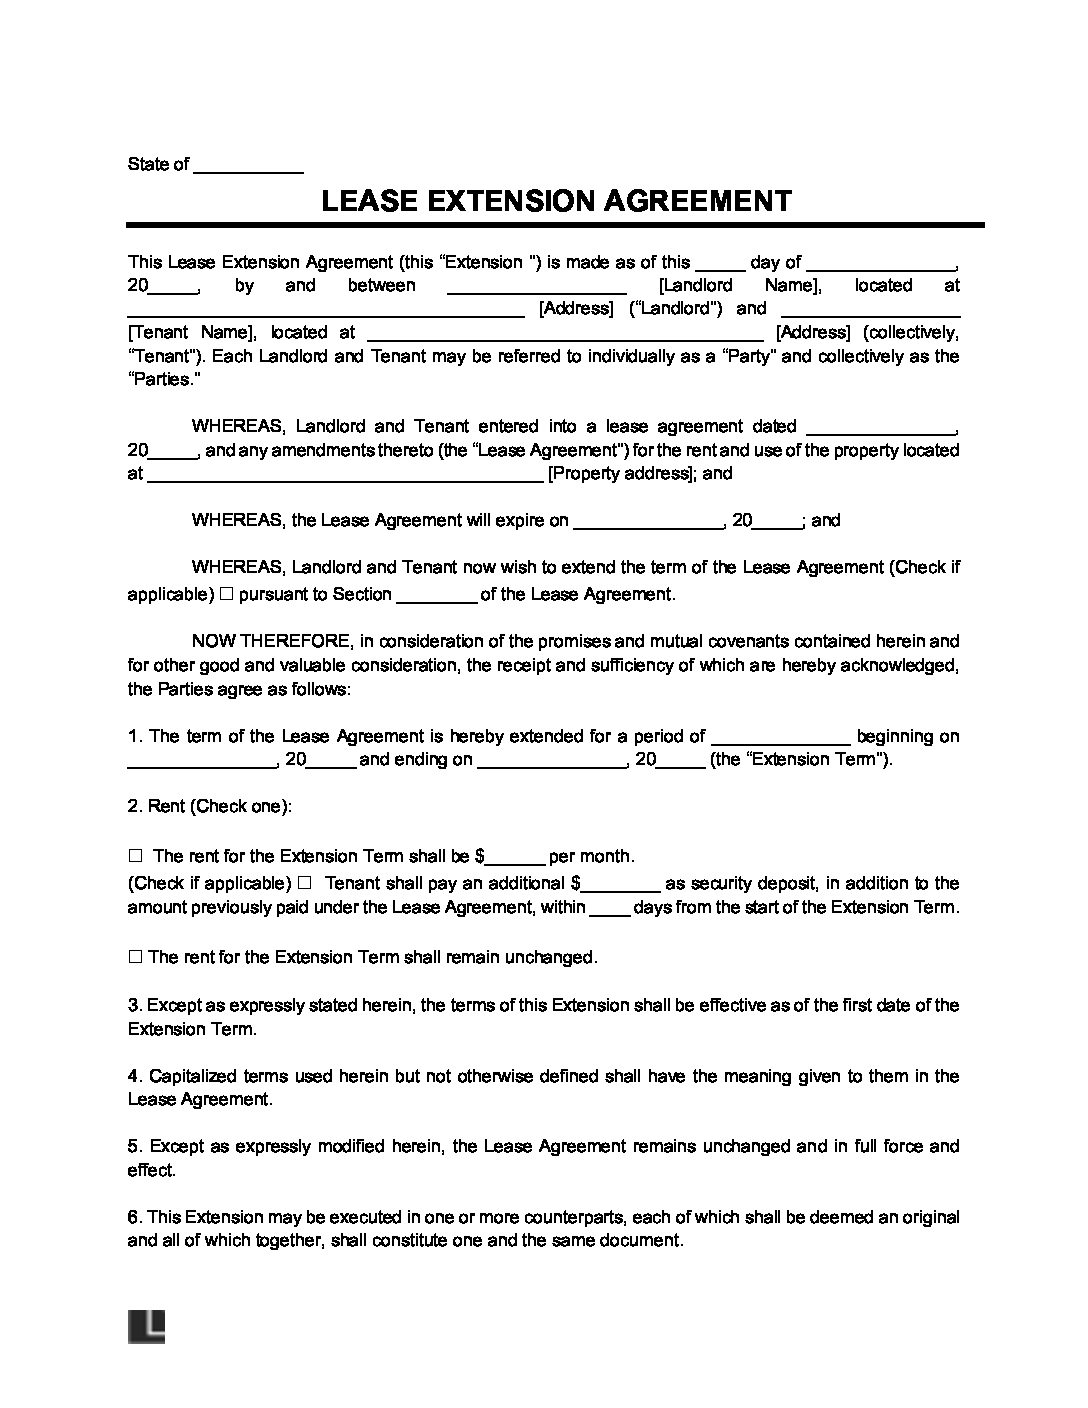 lease extension assignment of rights